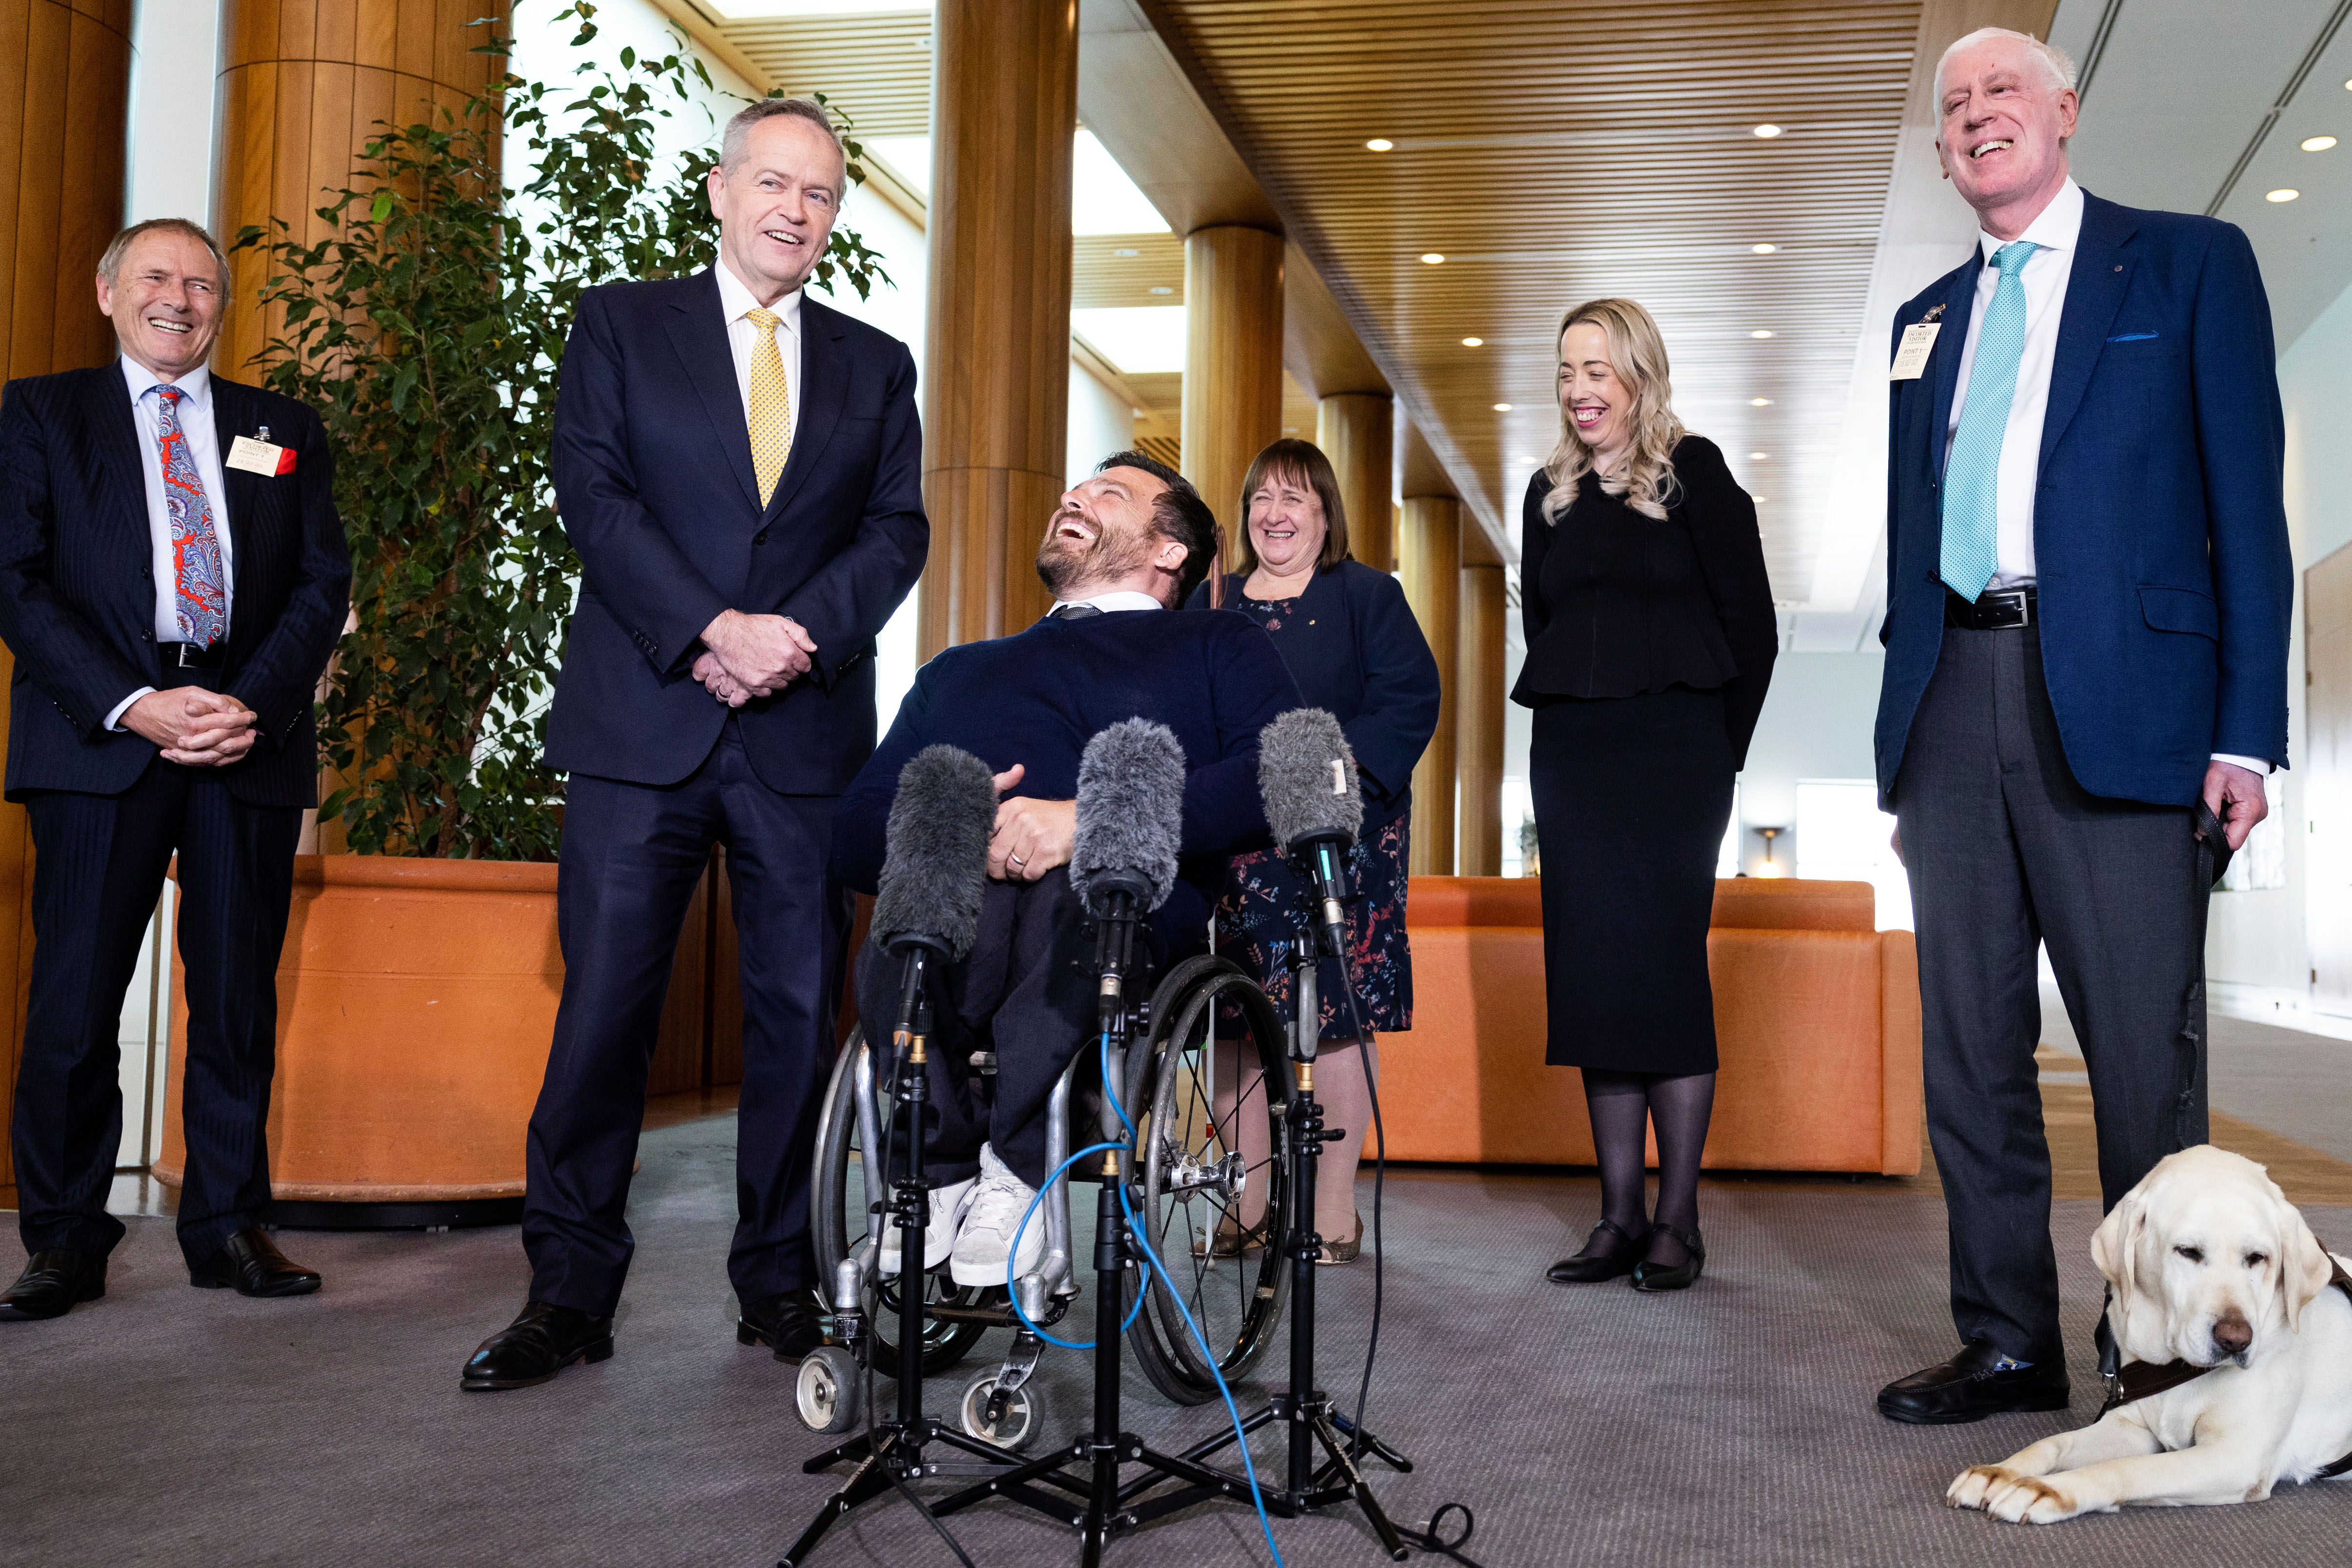 Former Paralympian Kurt Fearnley appointed as new NDIA chair